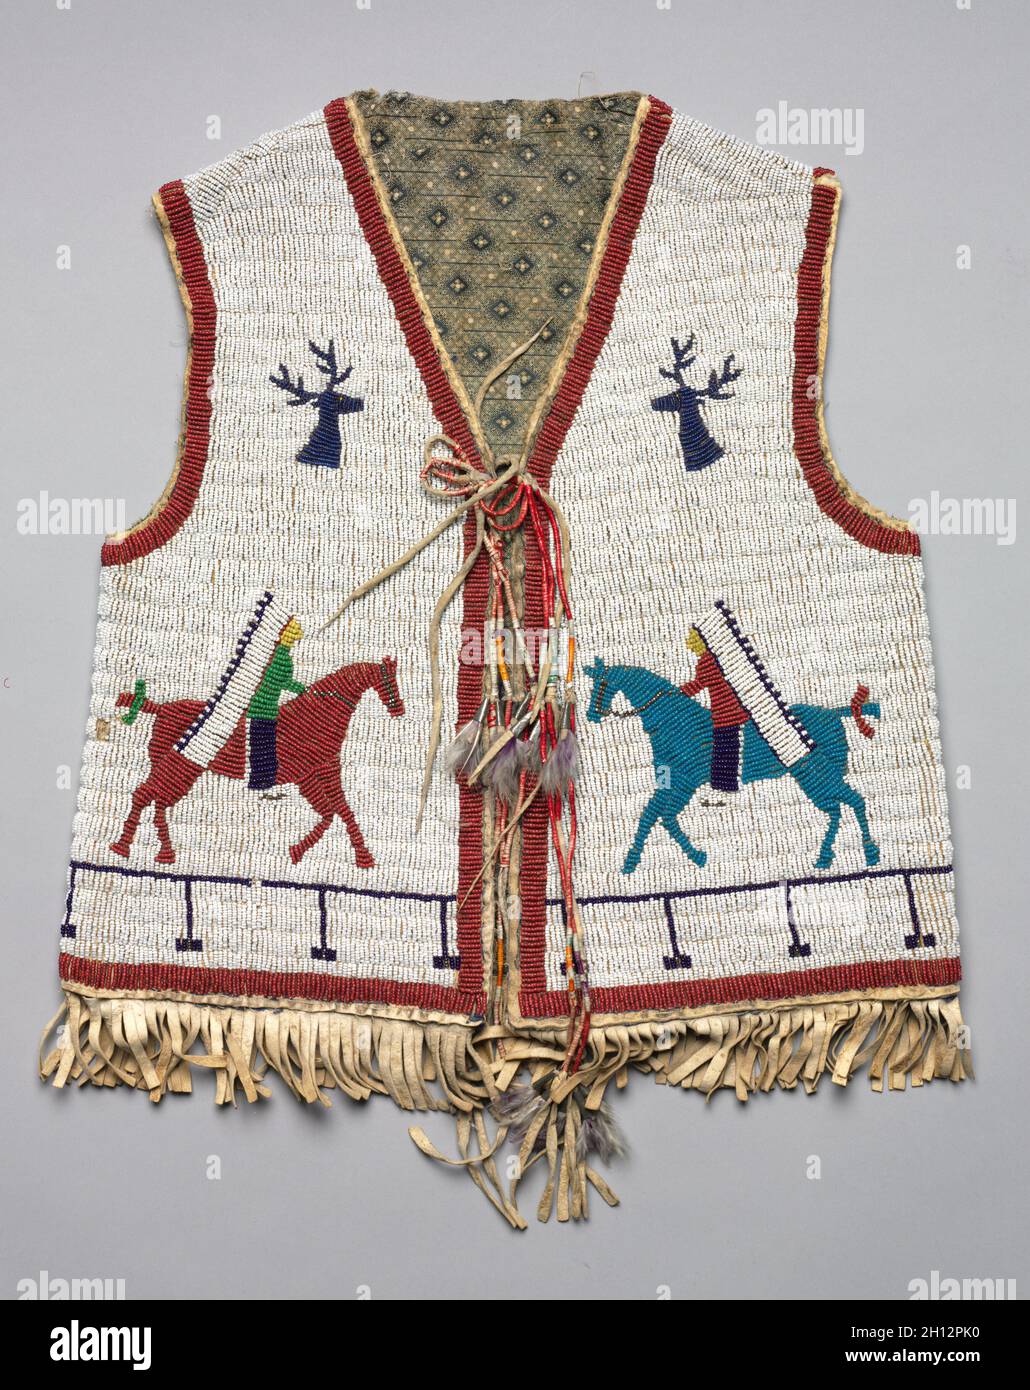 Beaded Child's Vest, c 1890-1900. America, Native North American, Plains,  Lakota(Sioux), Post-Contact. Beaded leather; cotton lining; overall: 43.2 x  40.6 cm (17 x 16 in Stock Photo - Alamy